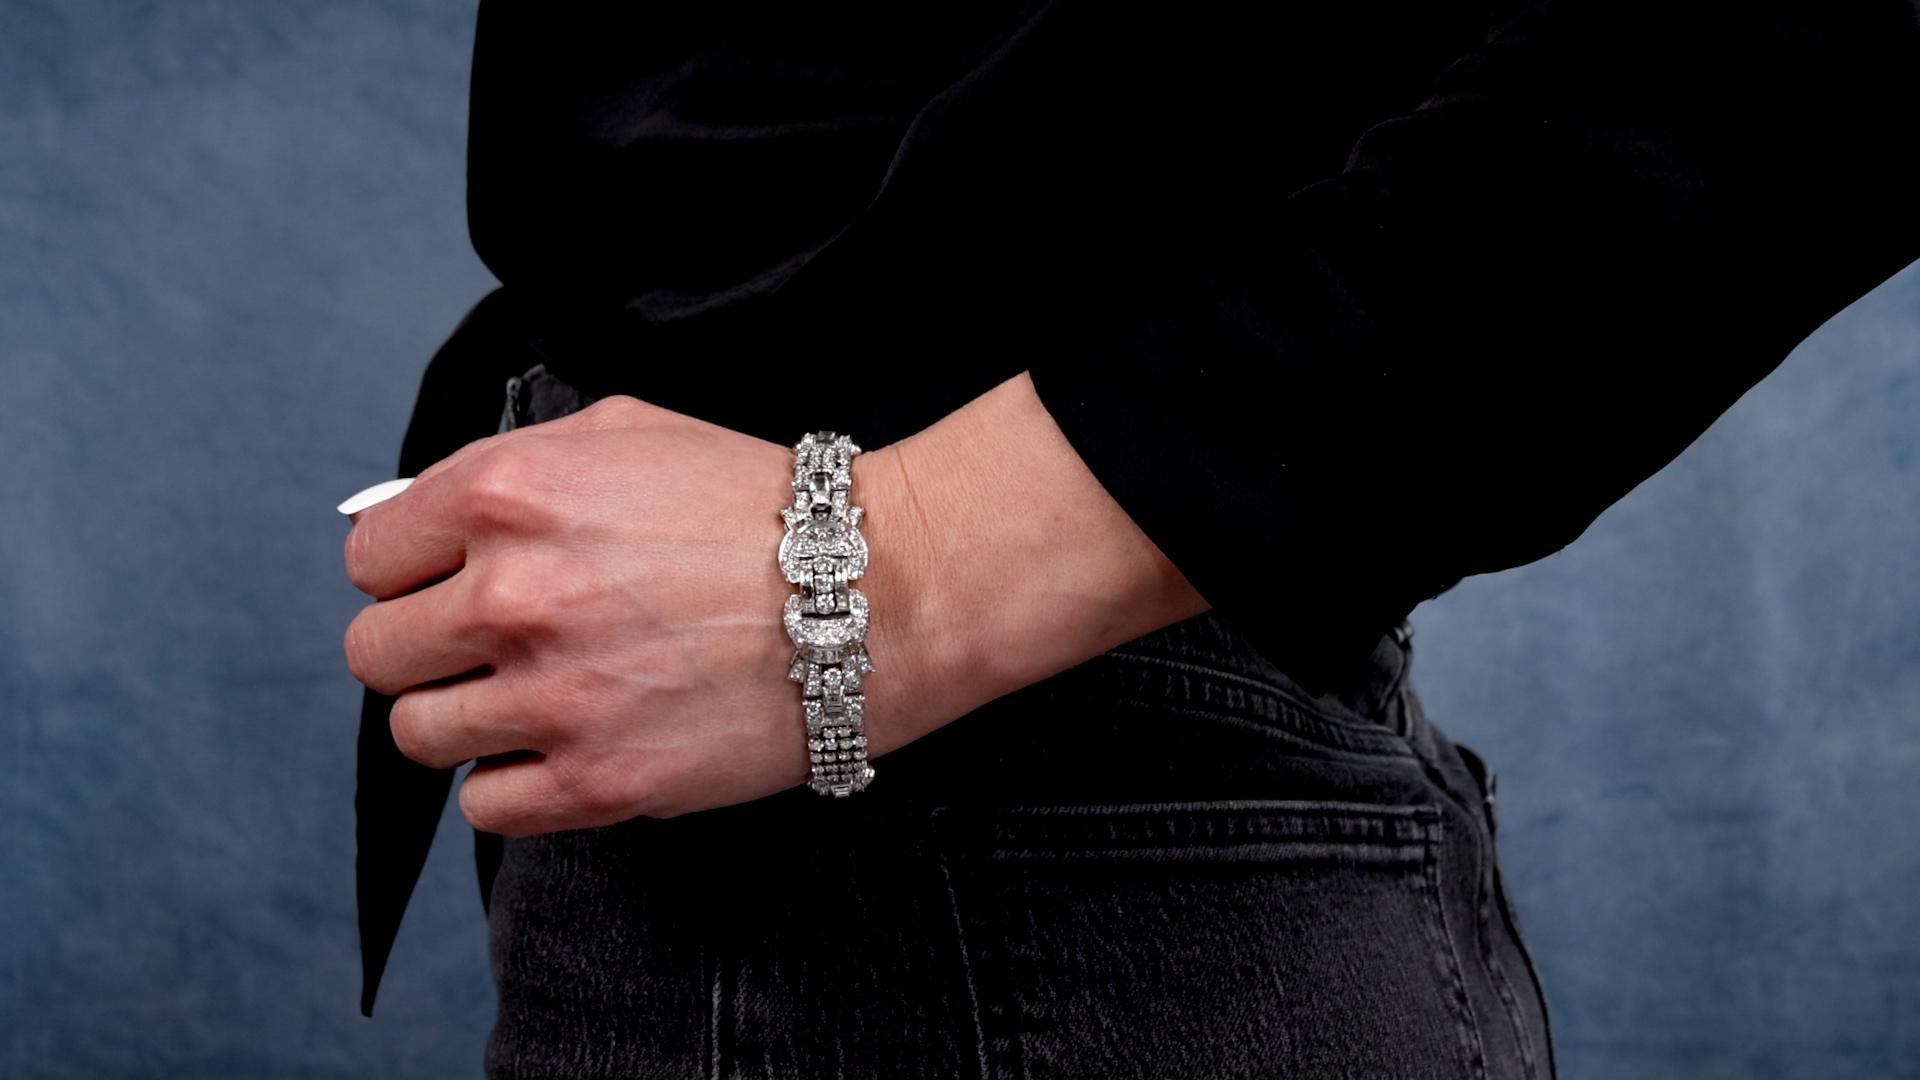 One Mid-Century 18.60 Carat Total Weight Diamond Platinum Bracelet. Featuring 30 baguette cut and 207 round brilliant and transitional cut diamonds with a total weight of approximately 18.60 carats, graded colorless, VS clarity. Crafted in platinum.